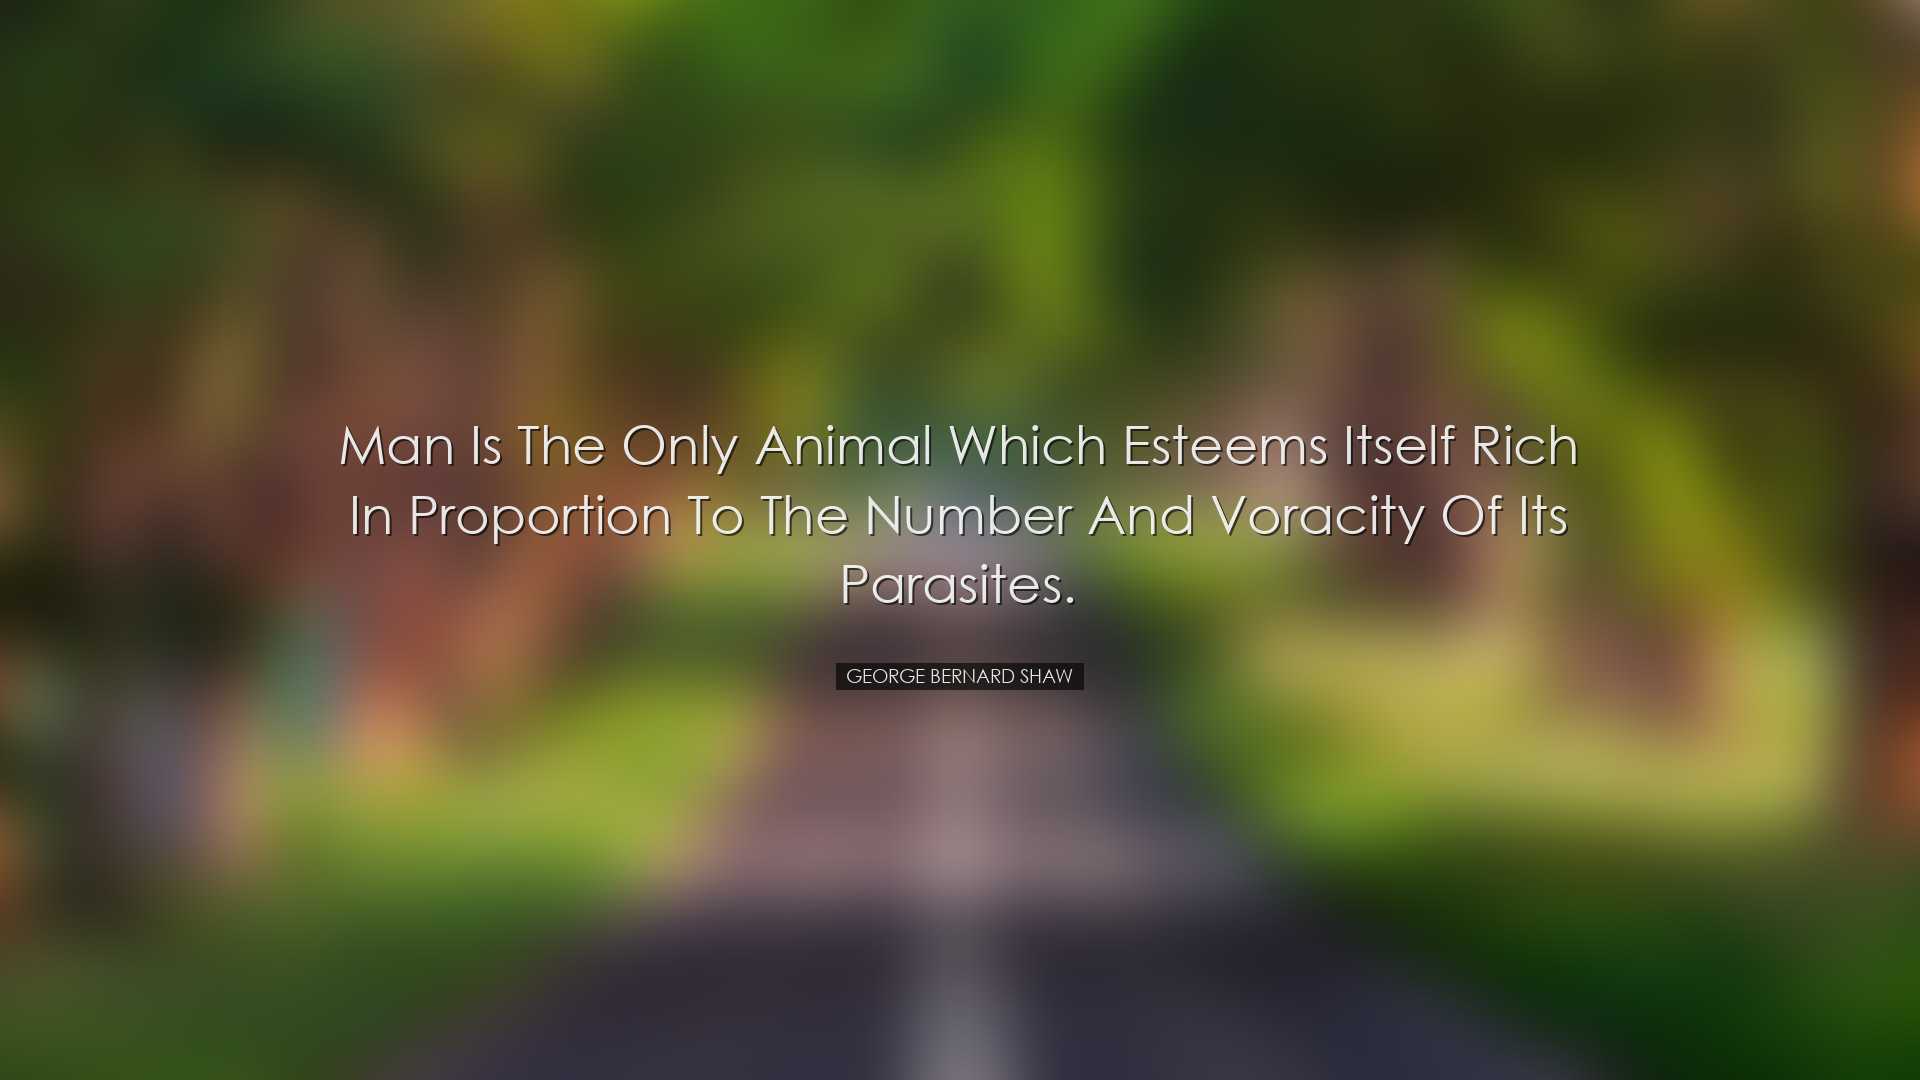 Man is the only animal which esteems itself rich in proportion to